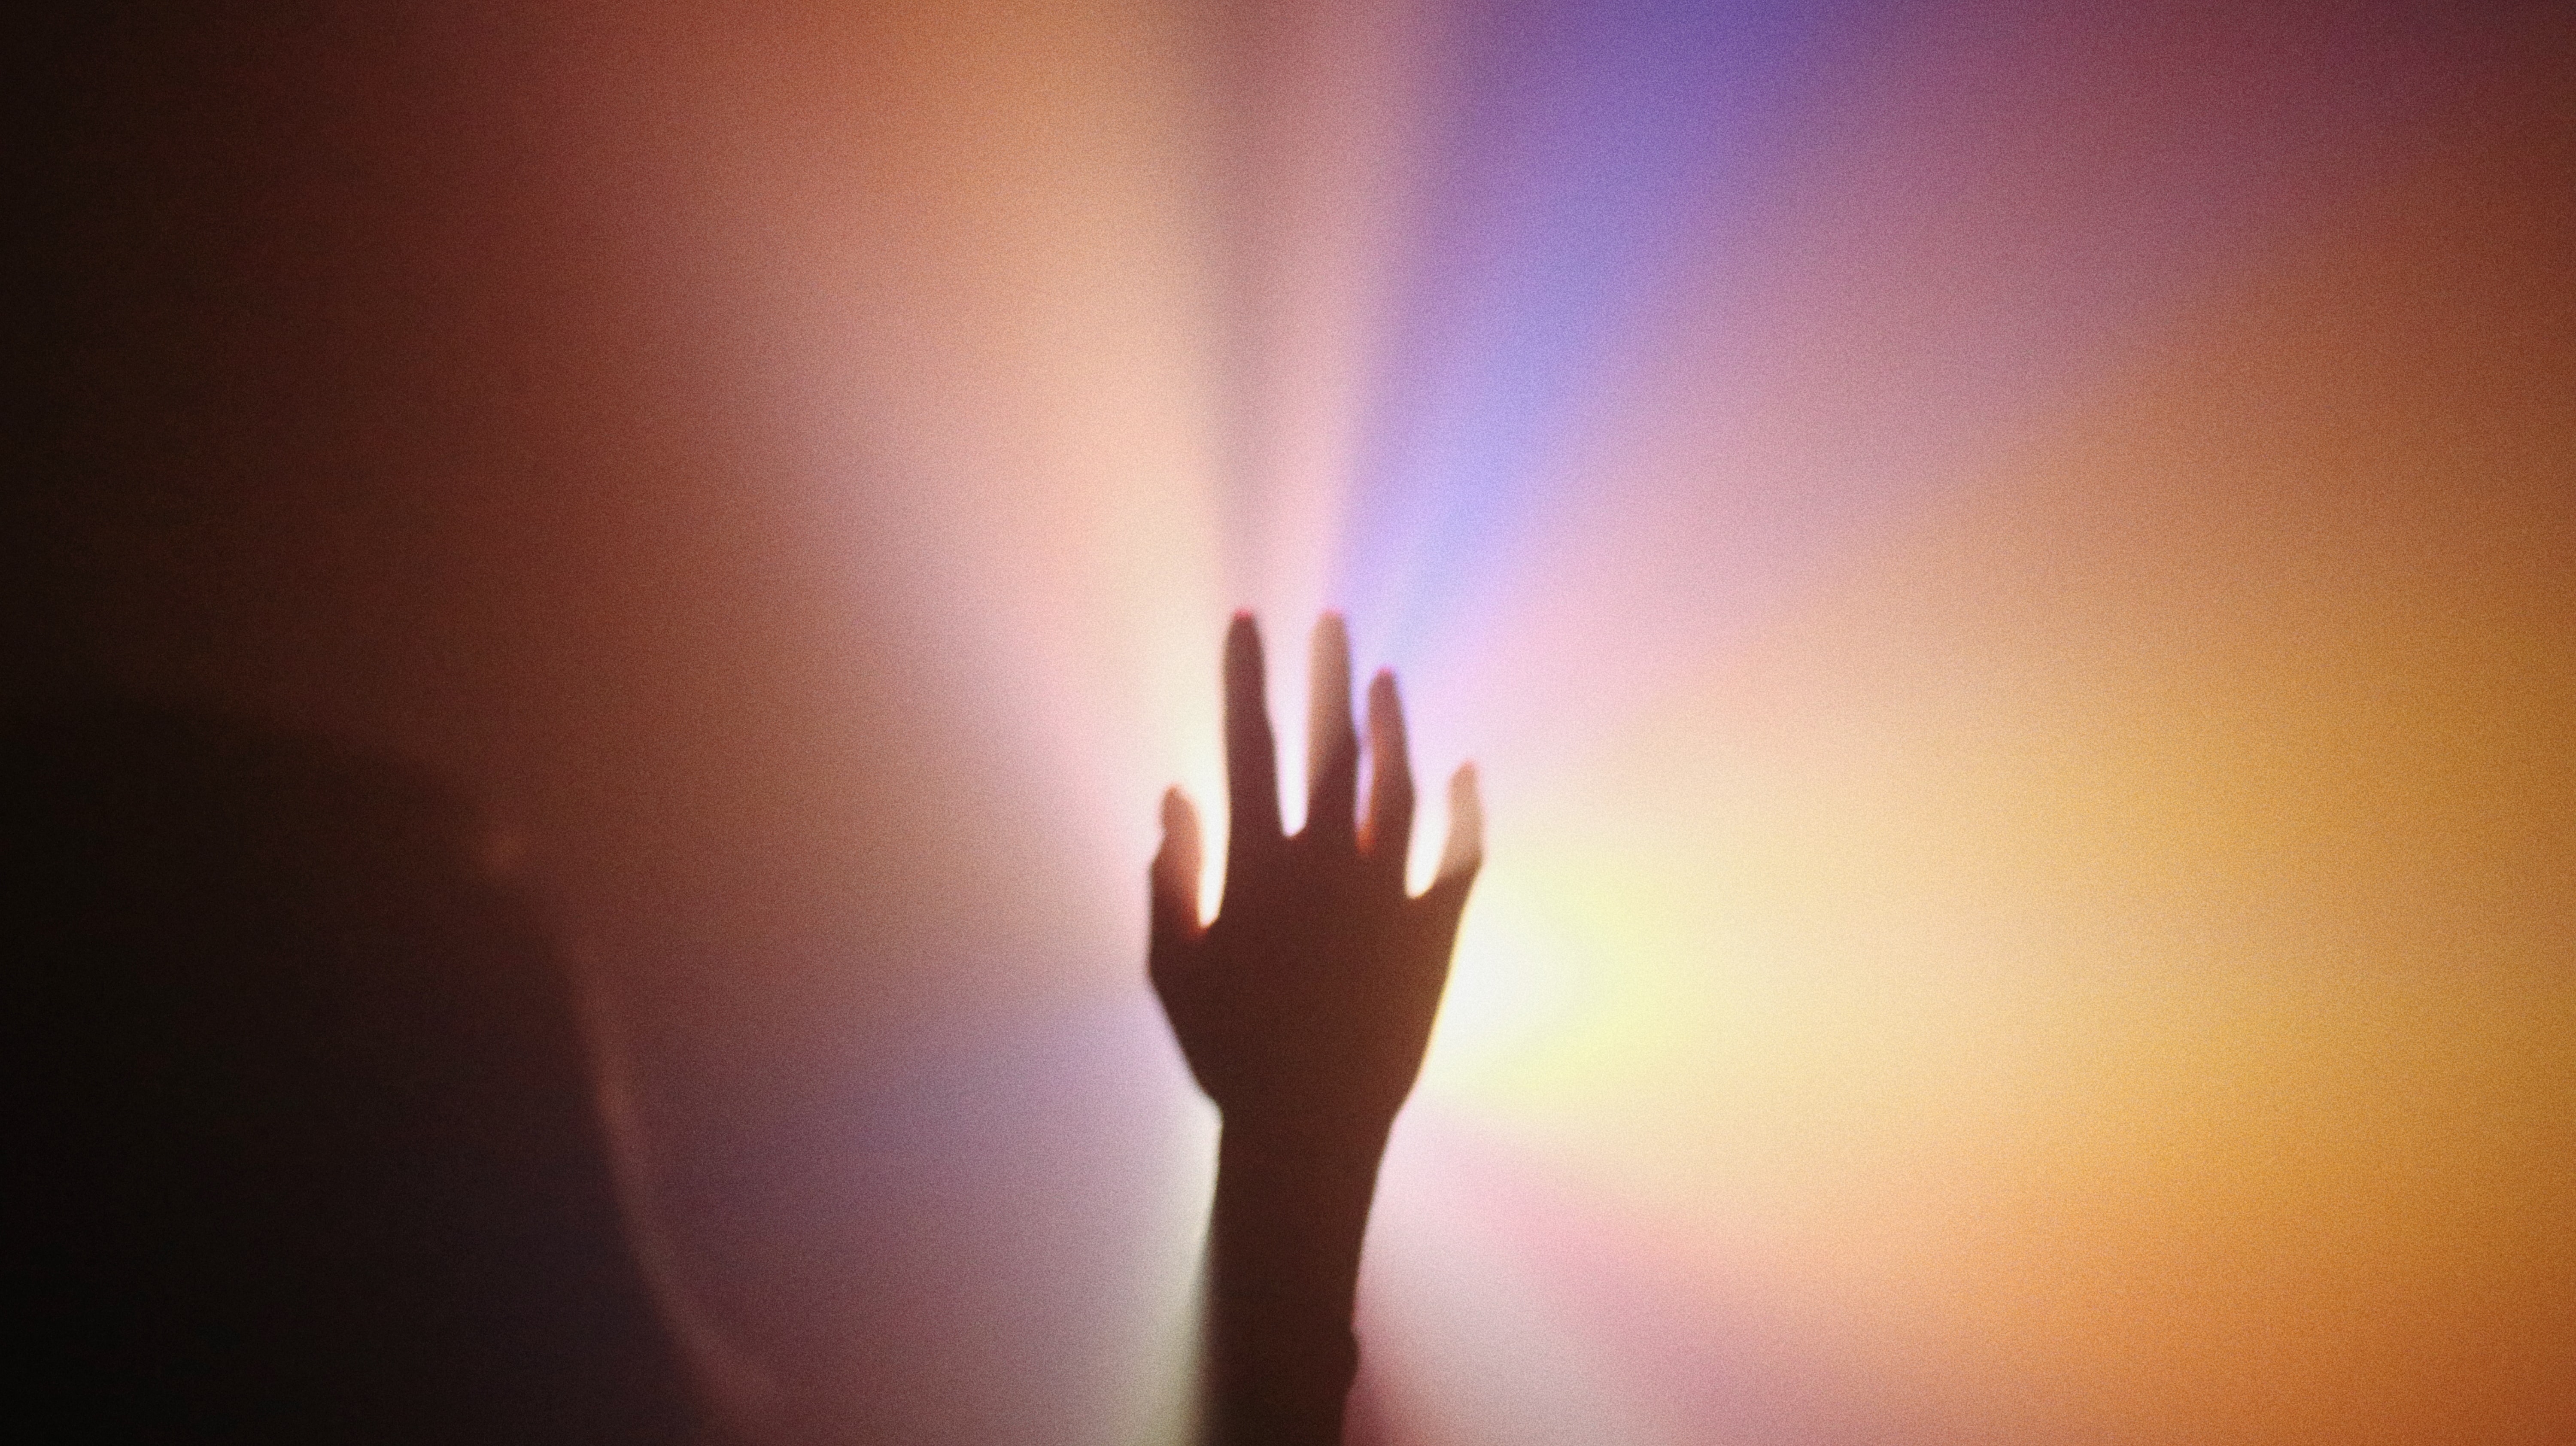 hand-reaching-out-in-colored-light-dream.jpg